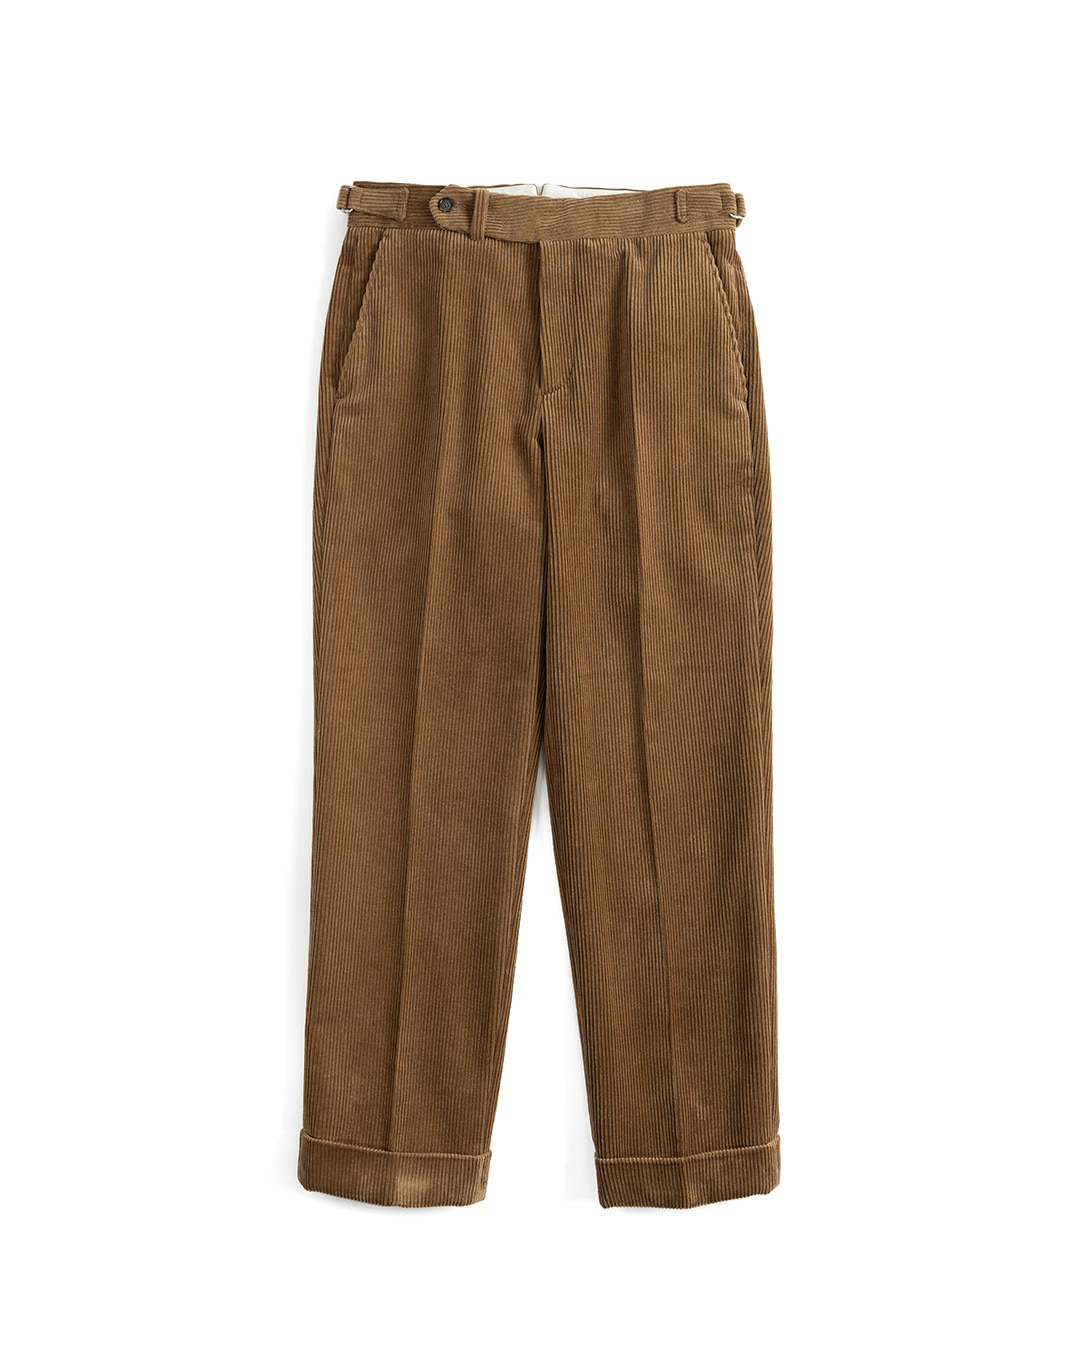 10 CORDUROY TROUSERS (olive)